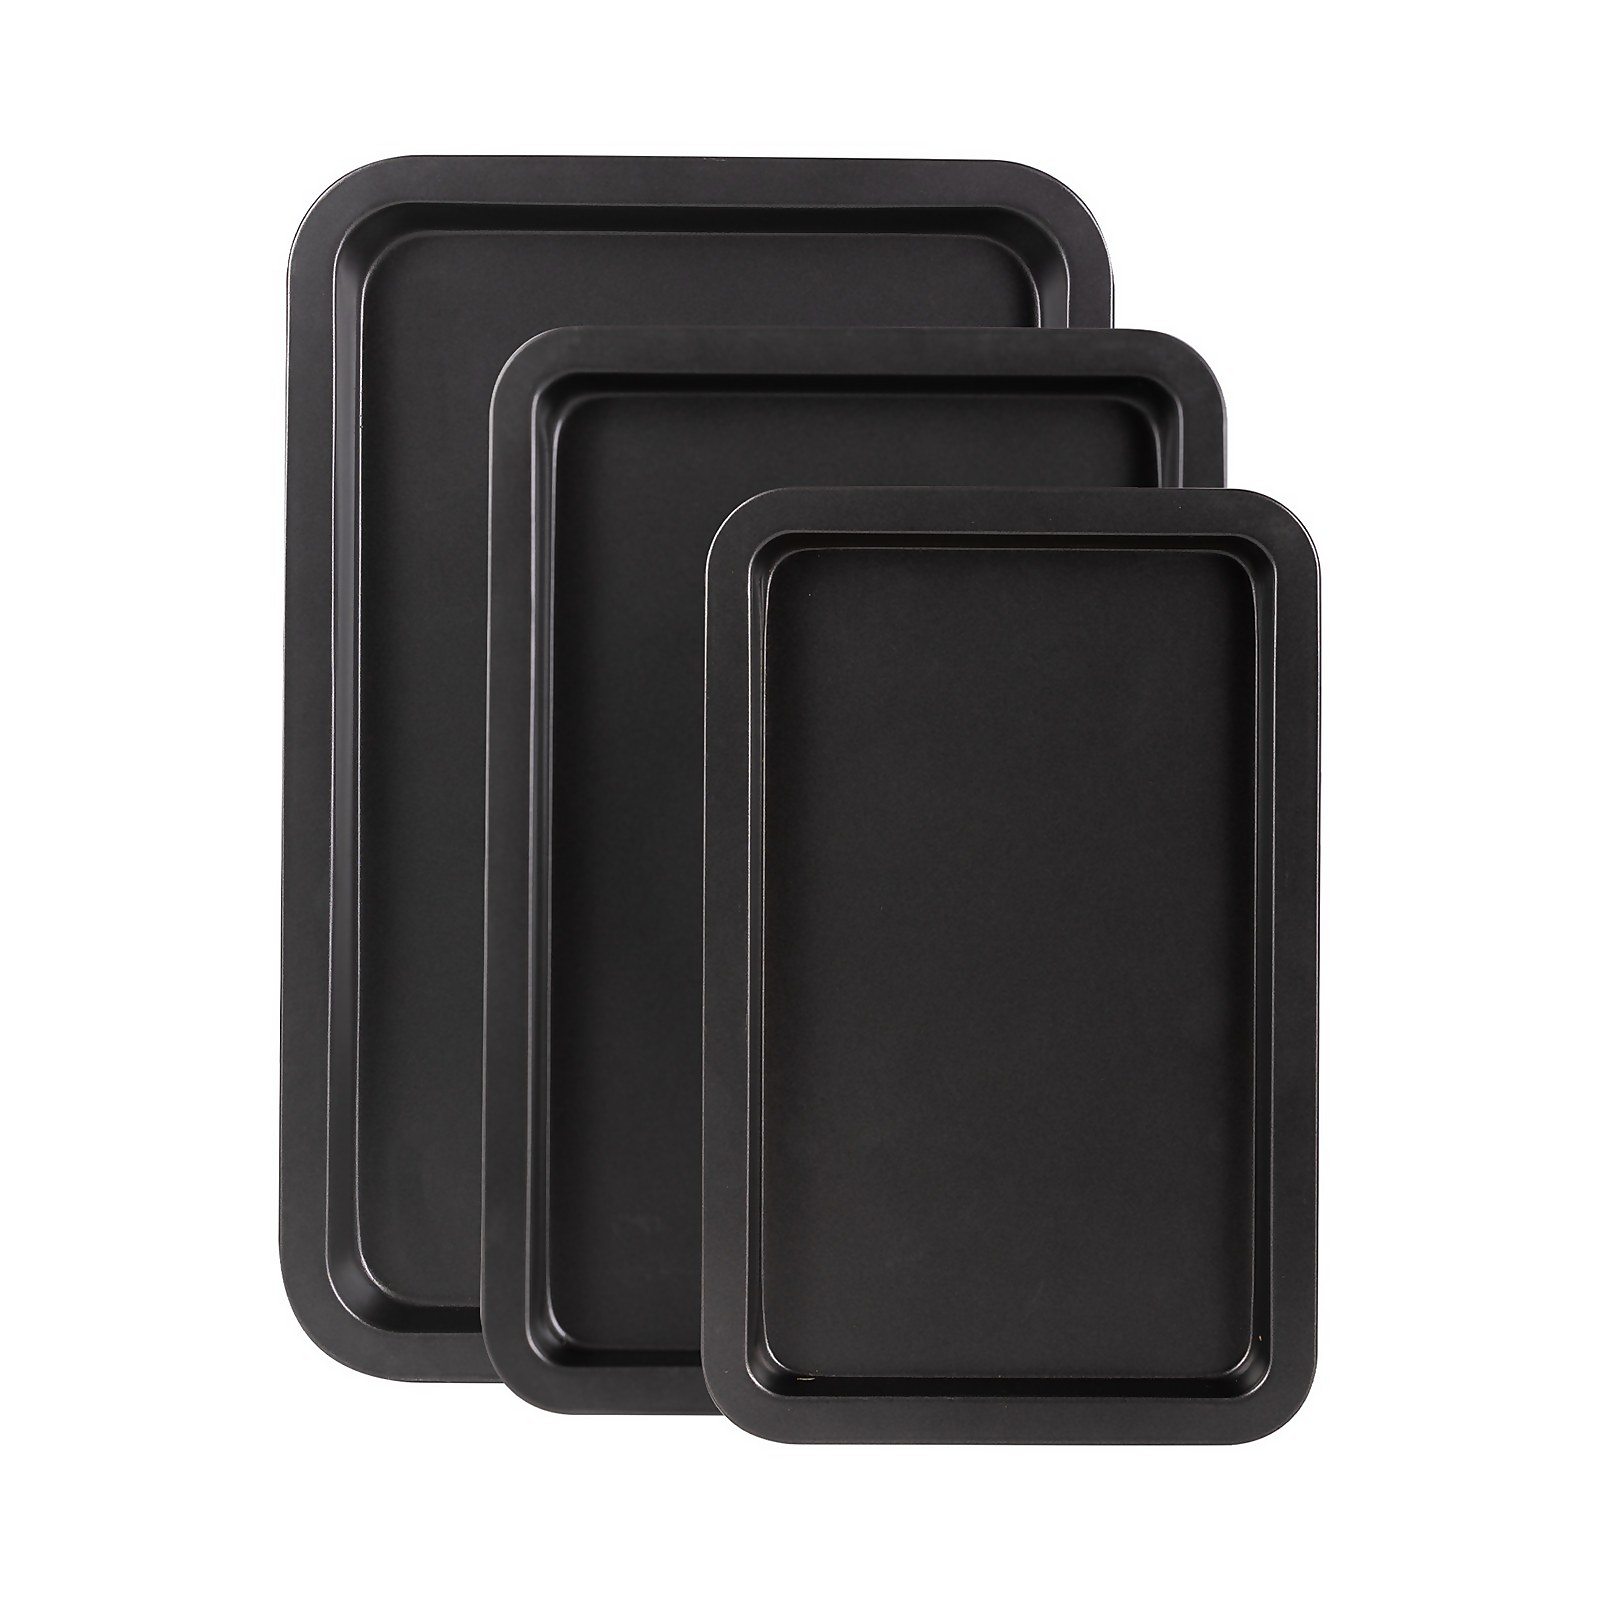 Photo of Prep & Cook 3 Piece Oven Tray Set